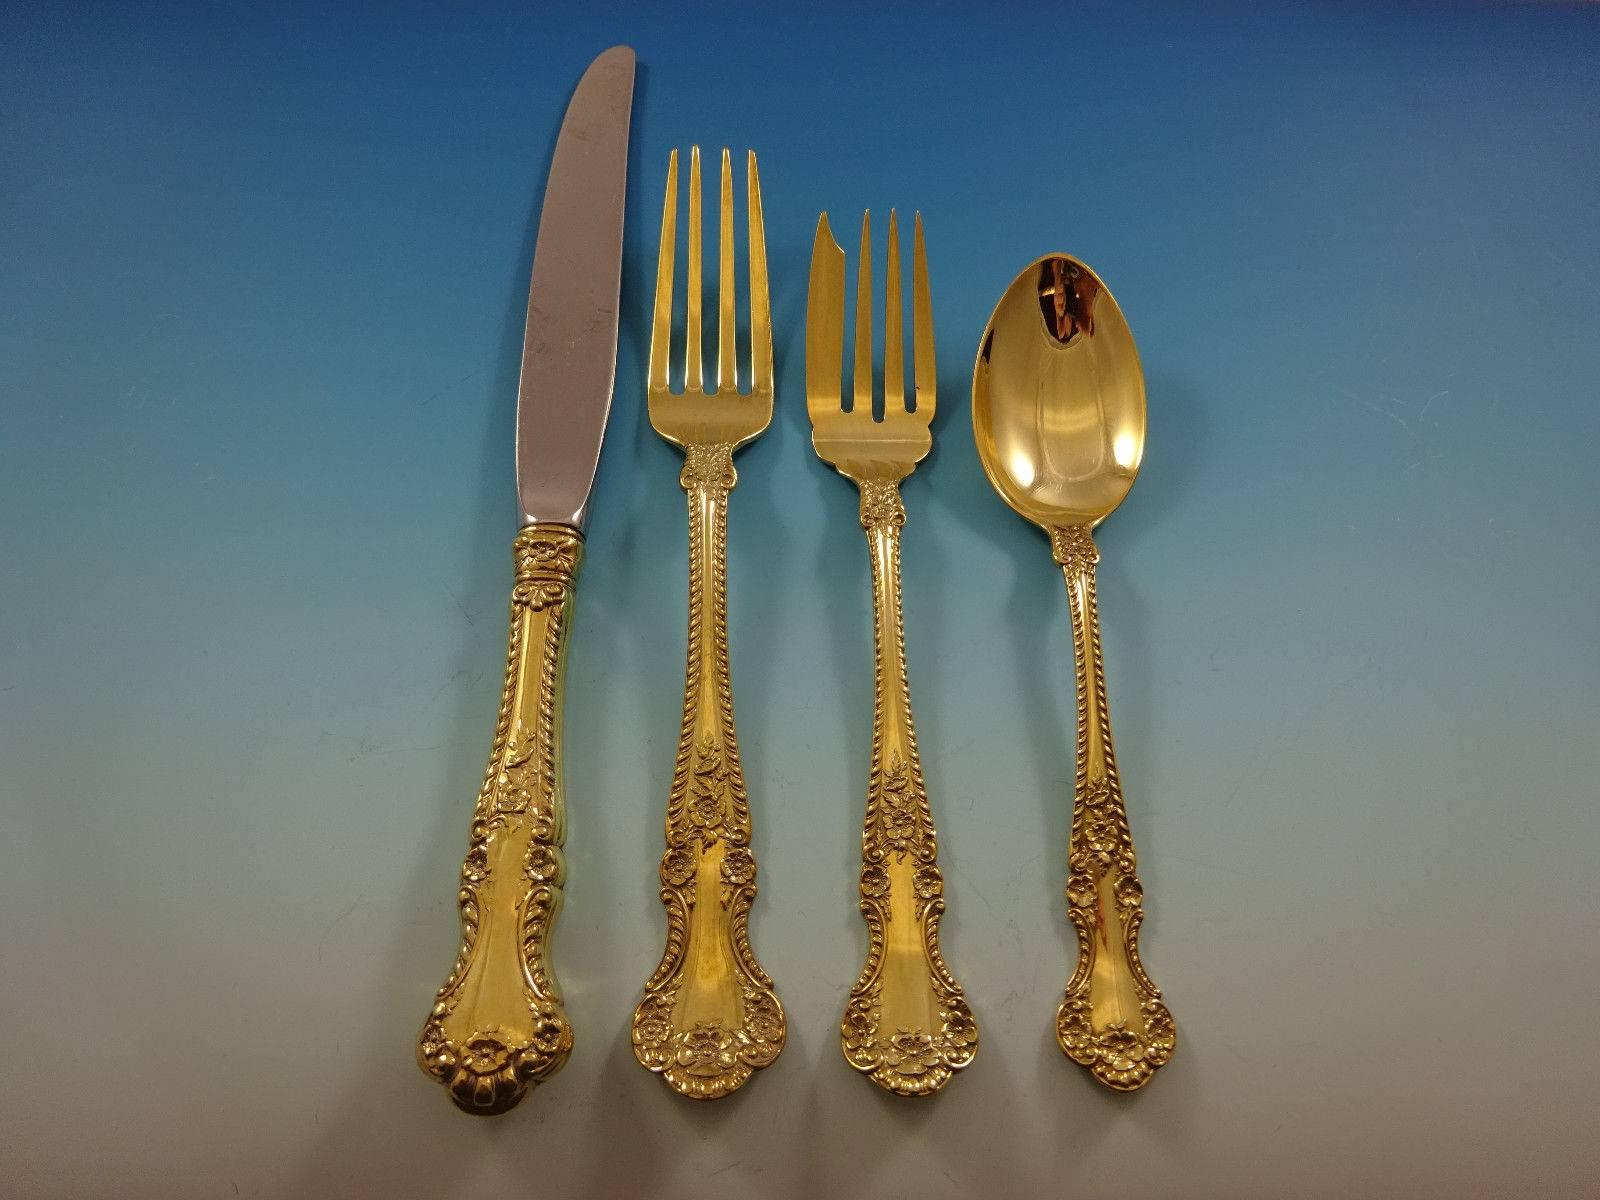 Stunning Cambridge Gold by Gorham sterling silver flatware set of 48 pieces. 

Gold flatware is on trend and makes a bold statement on your table. This set is vermeil (completely gold-washed) and includes:
 
12 knives, 8 7/8